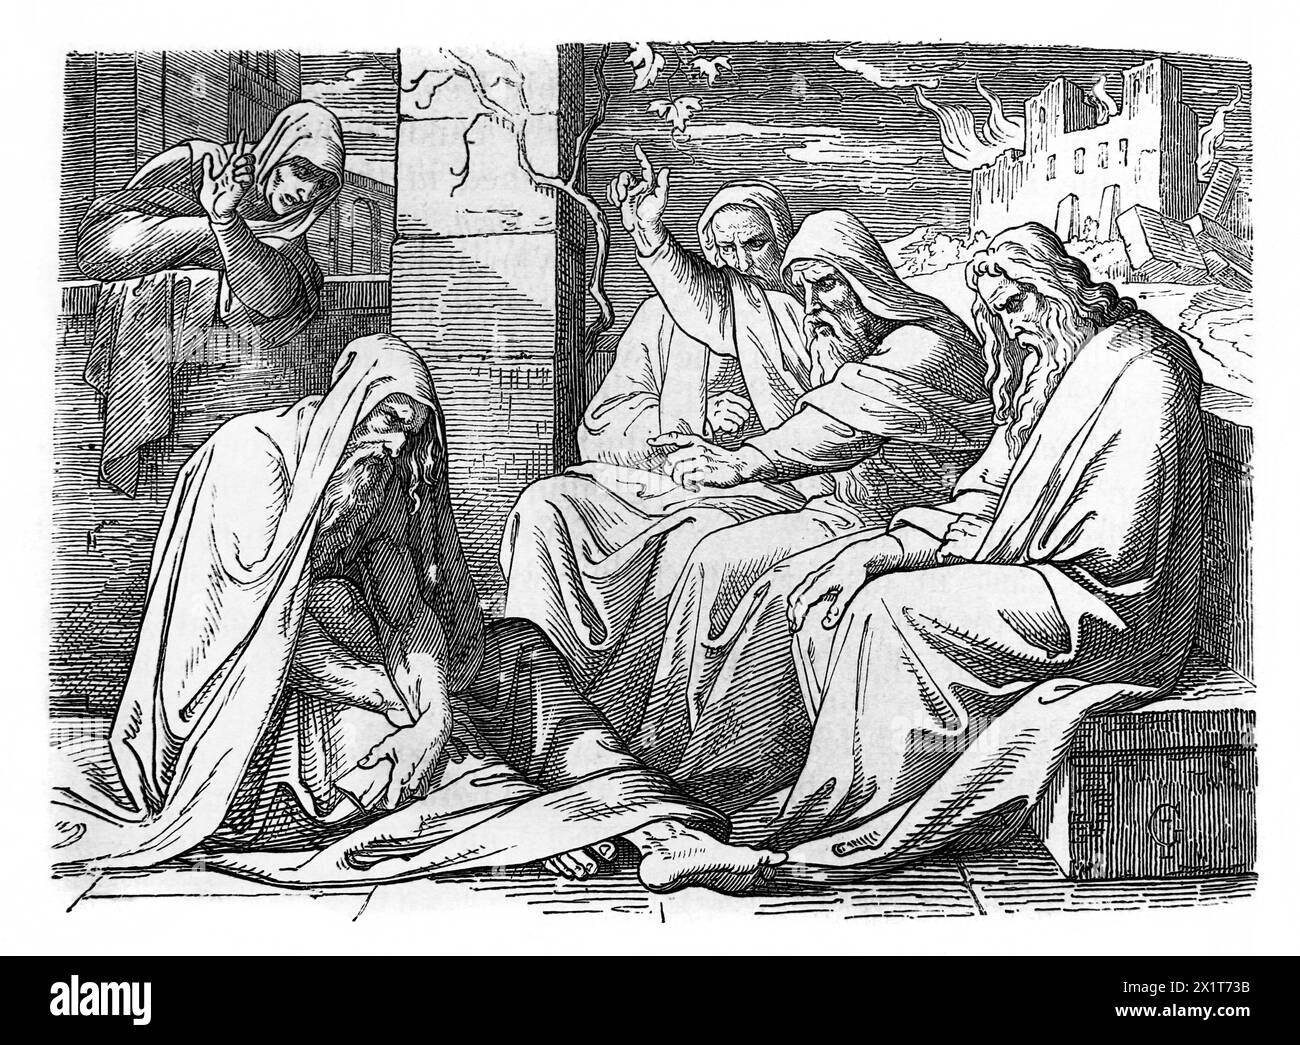 Wood Engraving of Job's Friends Eliphaz, Bildad and Zophar Counsel him after he has lost everything Eliphaz the Terminite says 'Who Can Withhold Himse Stock Photo